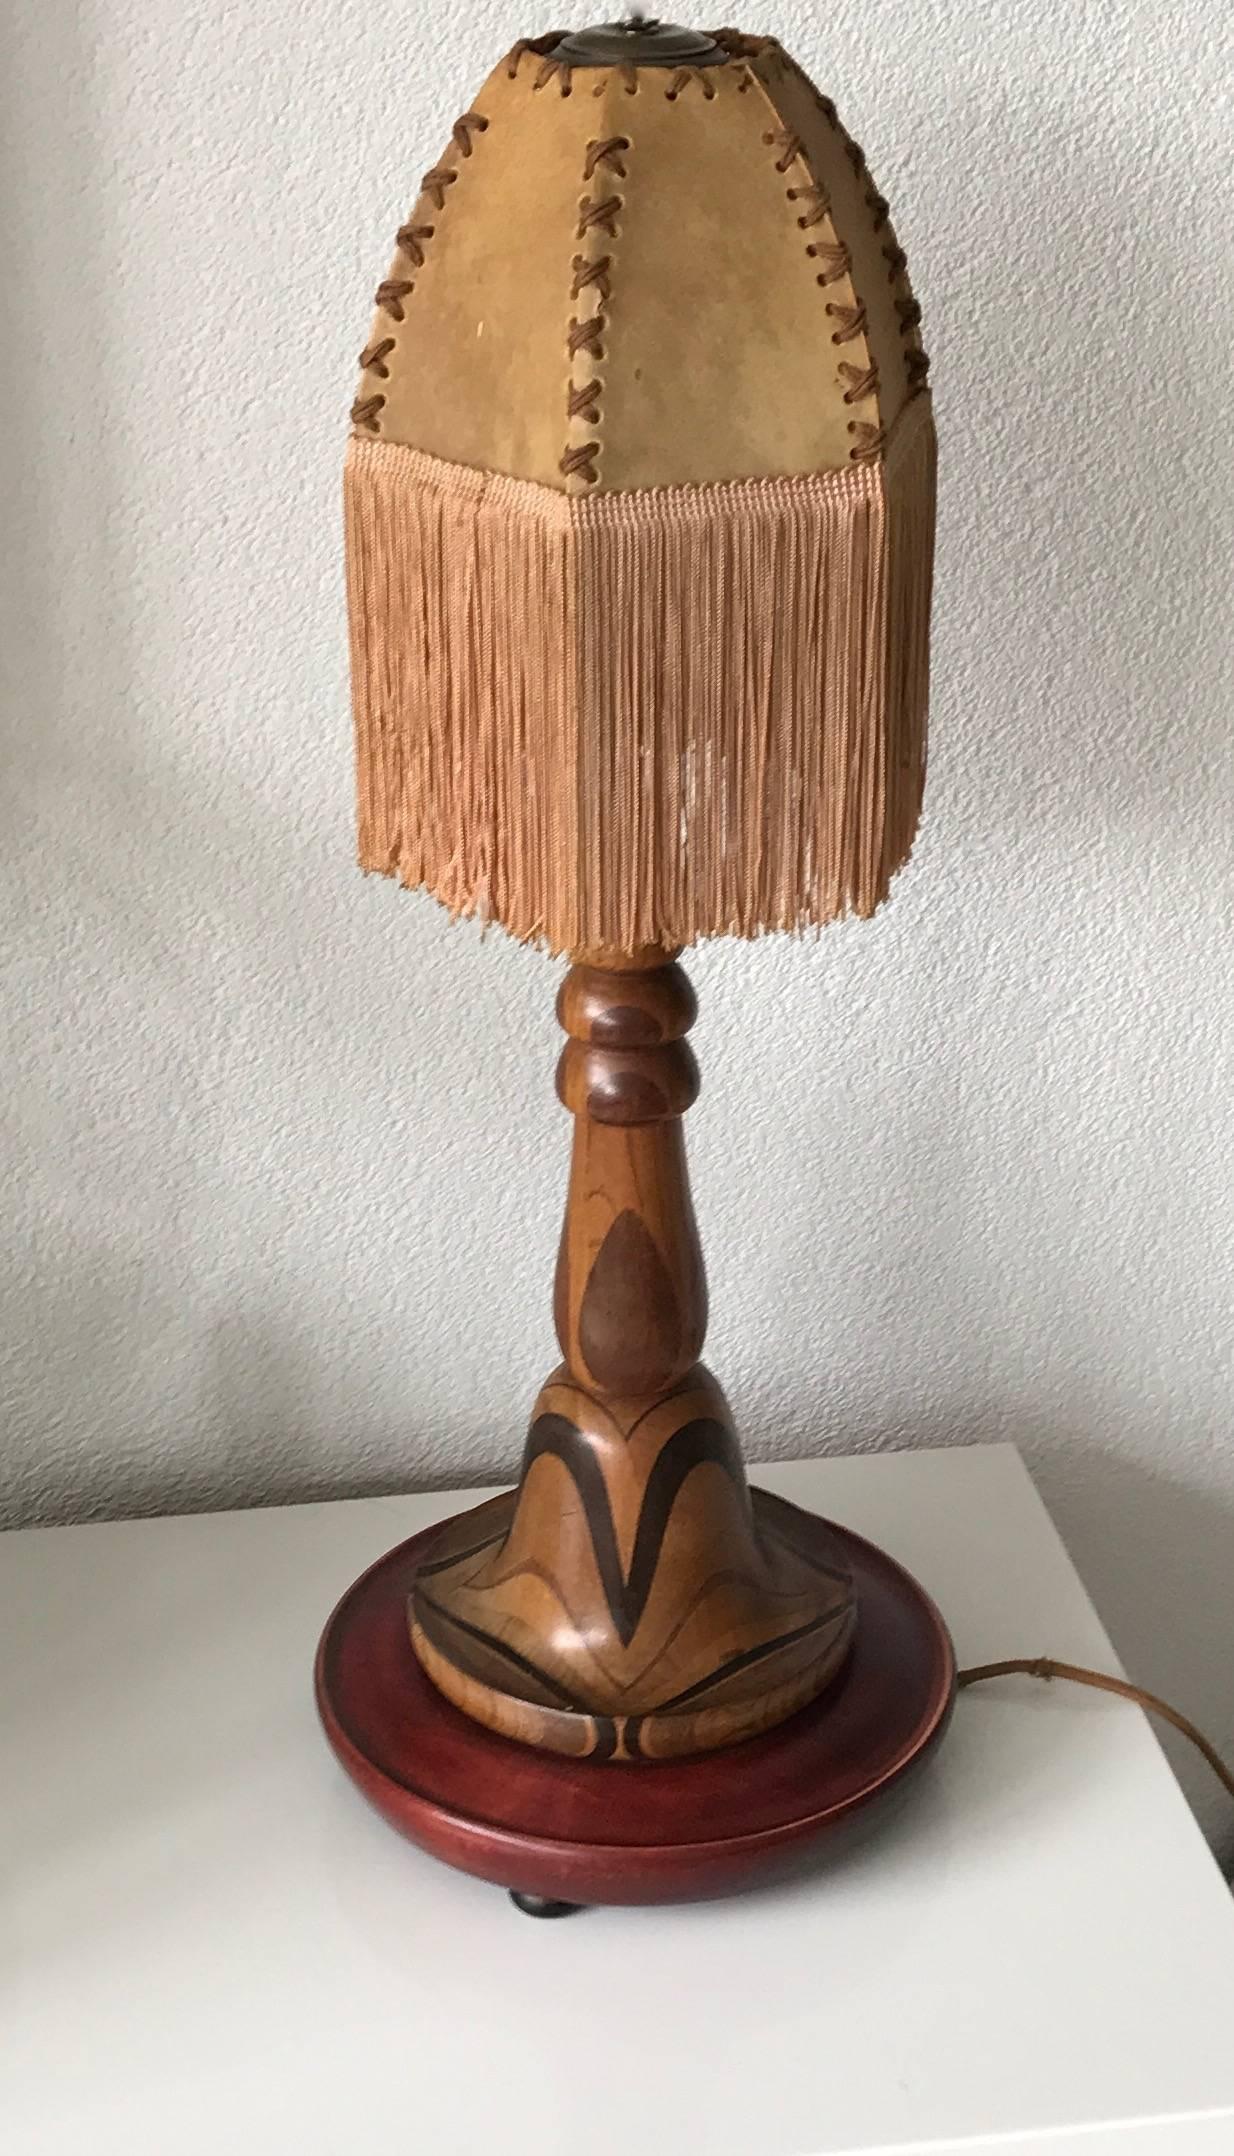 Beautiful Art Deco table lamp from the 1920s.

This wonderfully crafted Art Deco lamp is of a great and pleasing to the eye design and it comes with a perfectly matching hide shade. It is in original and magnificent condition and what makes this